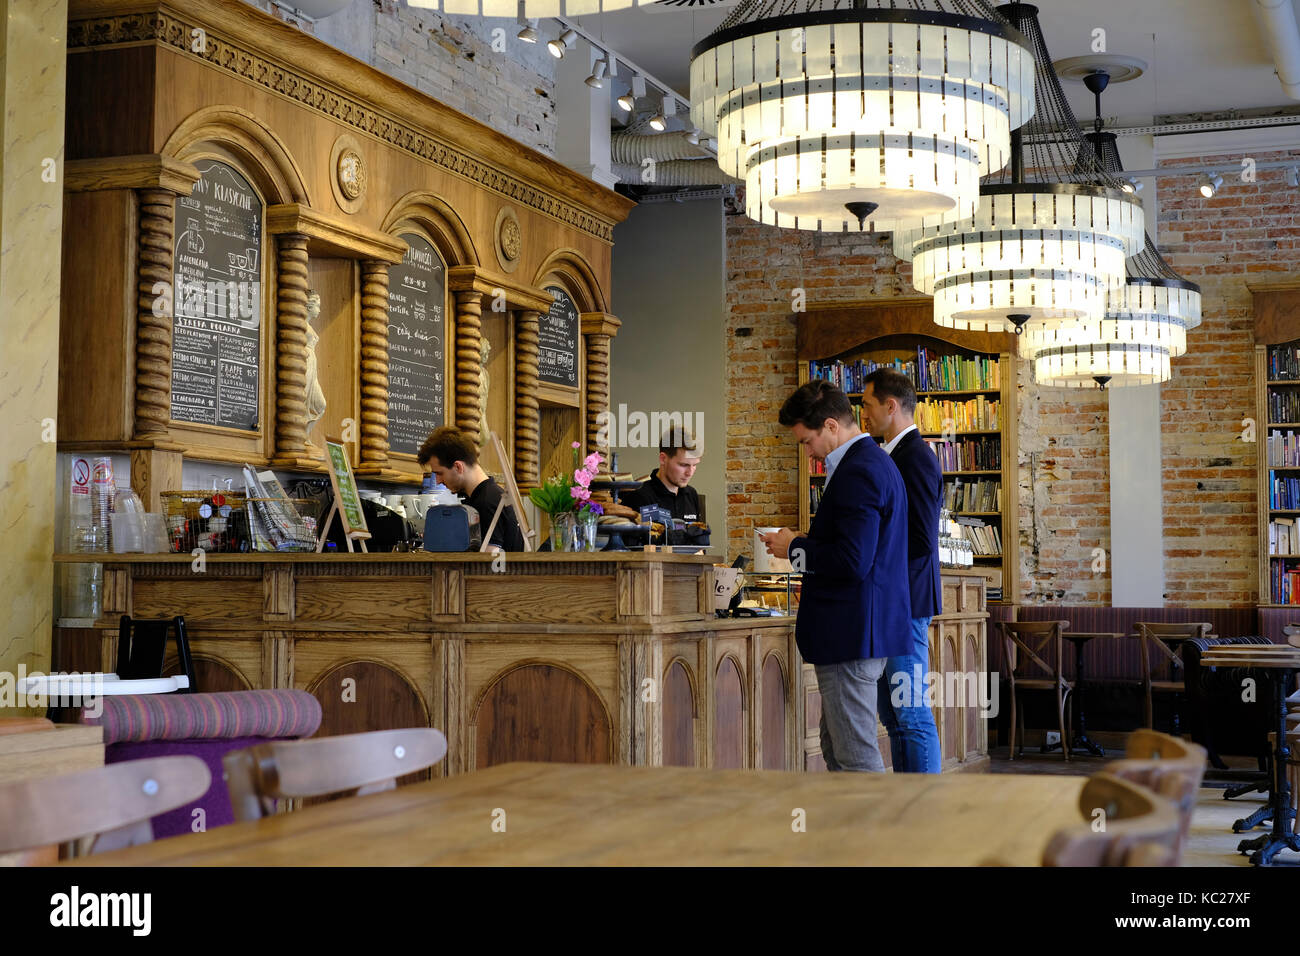 Interior Cafe Poland High Resolution Stock Photography and Images - Alamy